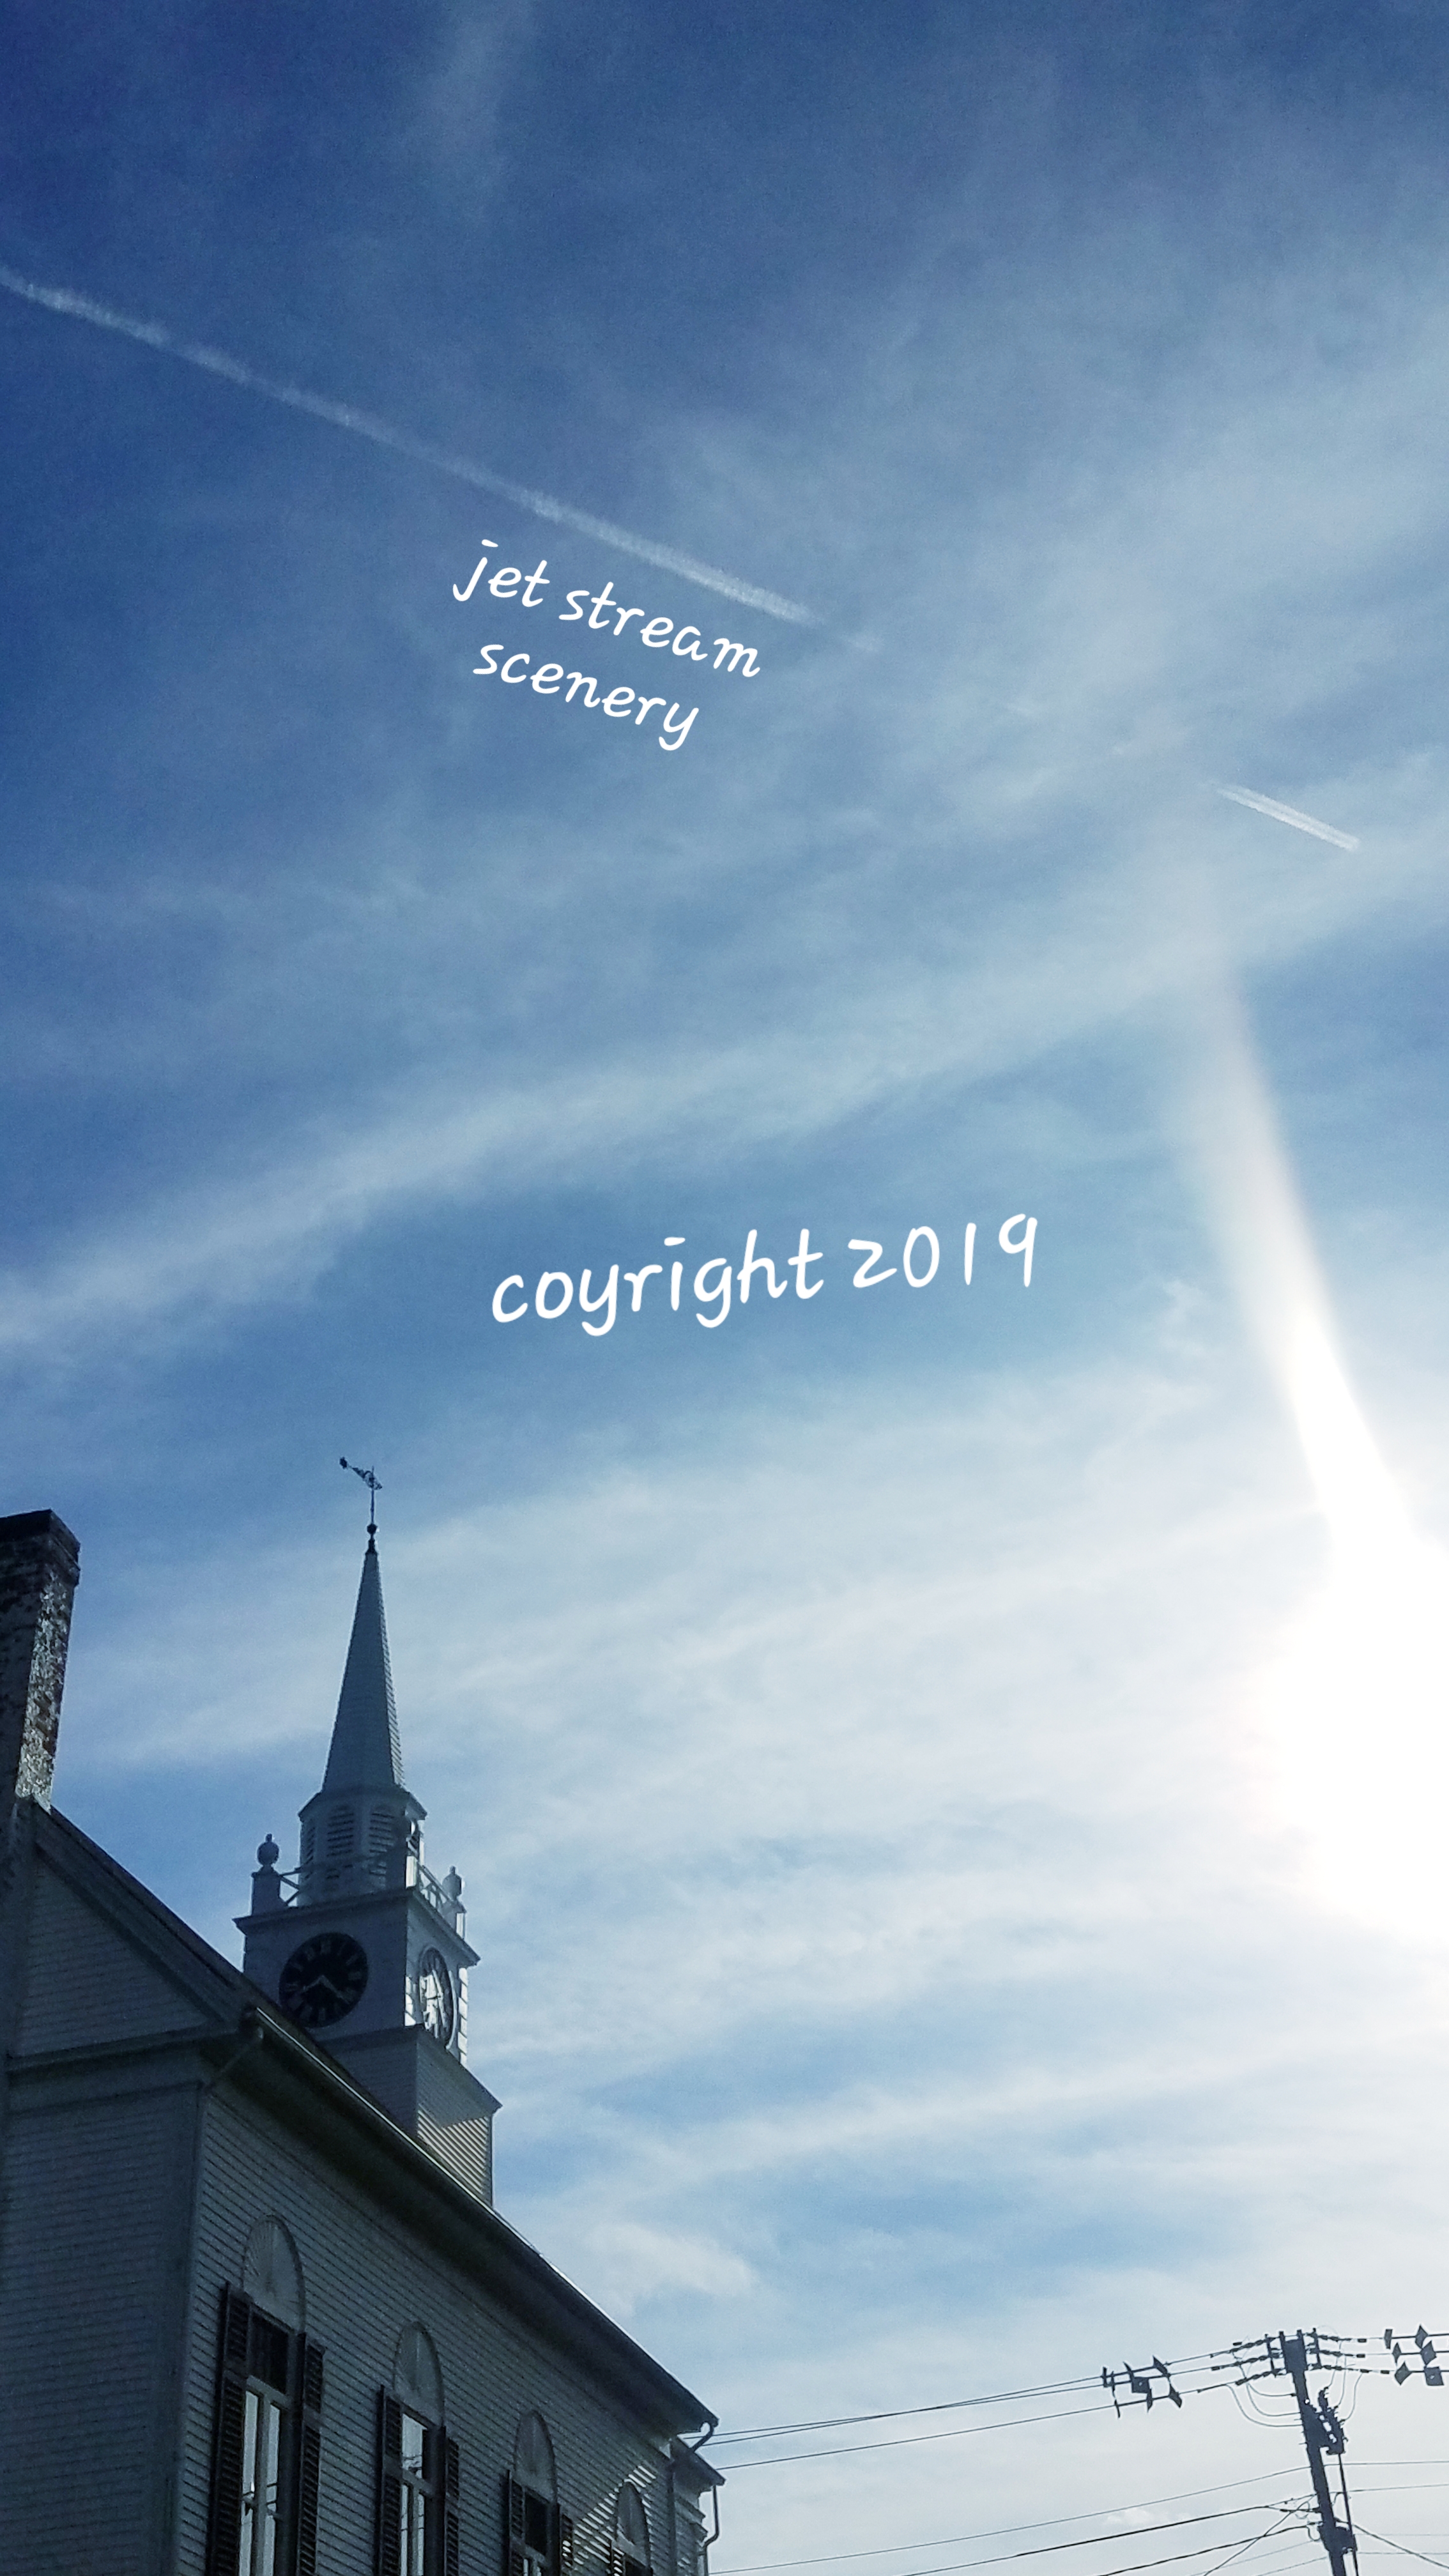 #SSTEEPLE SKY, SUN, AND VAPOR TRAIL FROM STREAM SCENERY